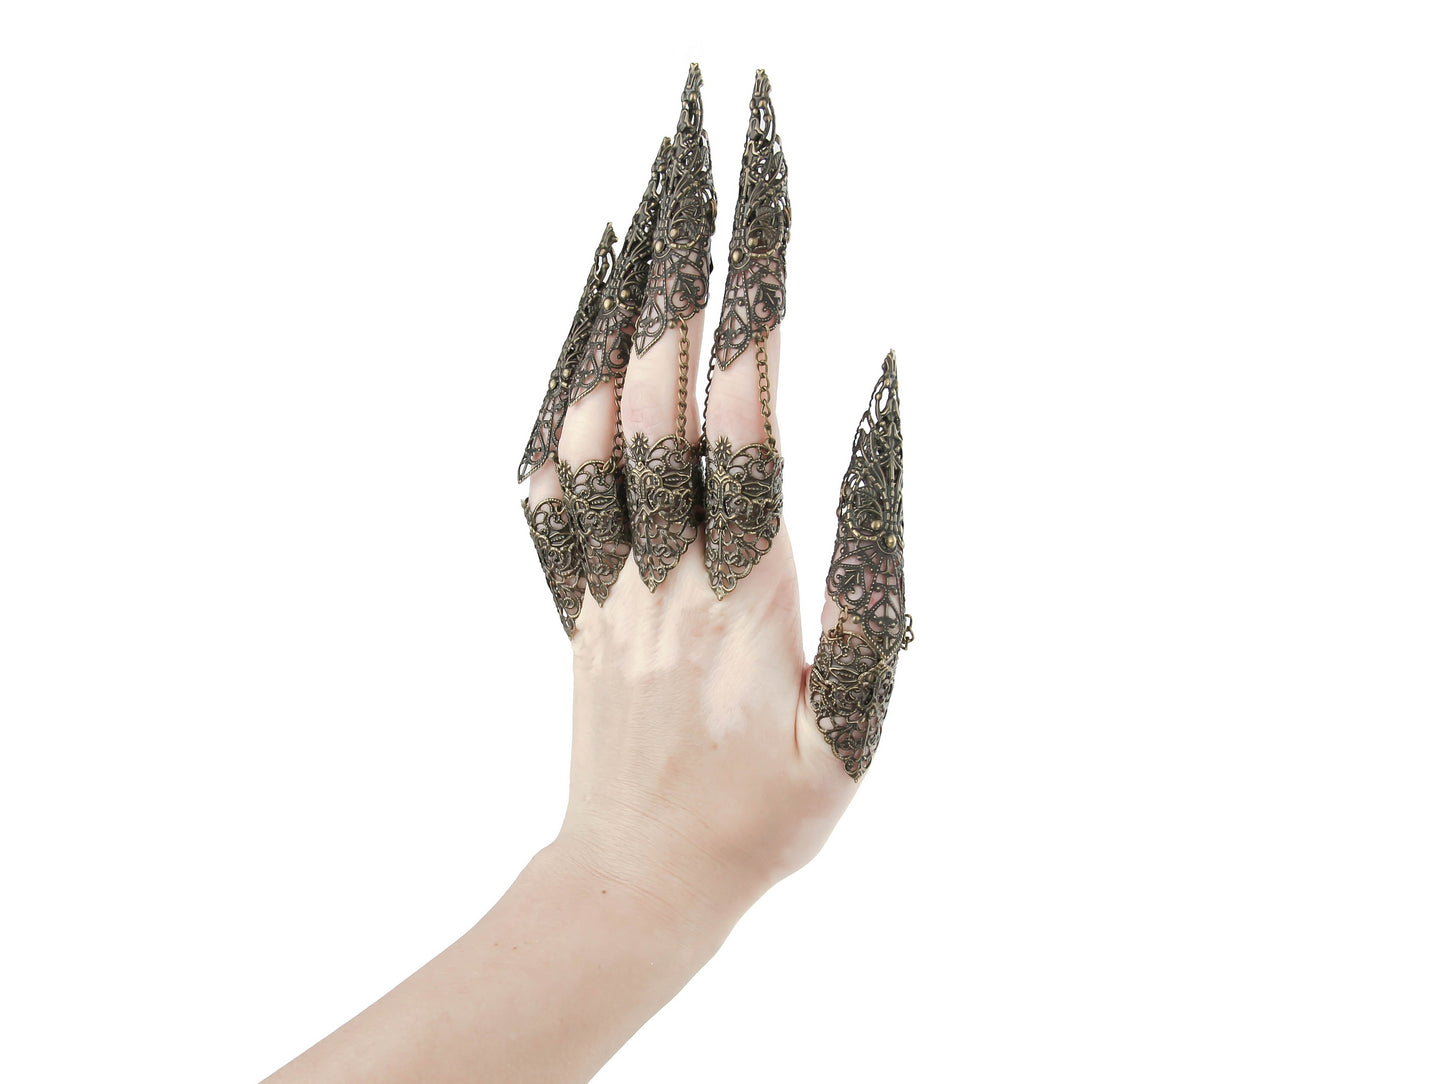 A hand is adorned with a full set of Myril Jewels bronze armor rings, each extending into elaborate long claws that showcase a fine lace-like filigree. This exquisite craftsmanship blends neo-gothic style with dark avant-garde elegance, perfect for Halloween, drag queen shows, or as a standout accessory for those who favor punk jewelry, gothic-chic, and witchcore aesthetics in their everyday and festival wear